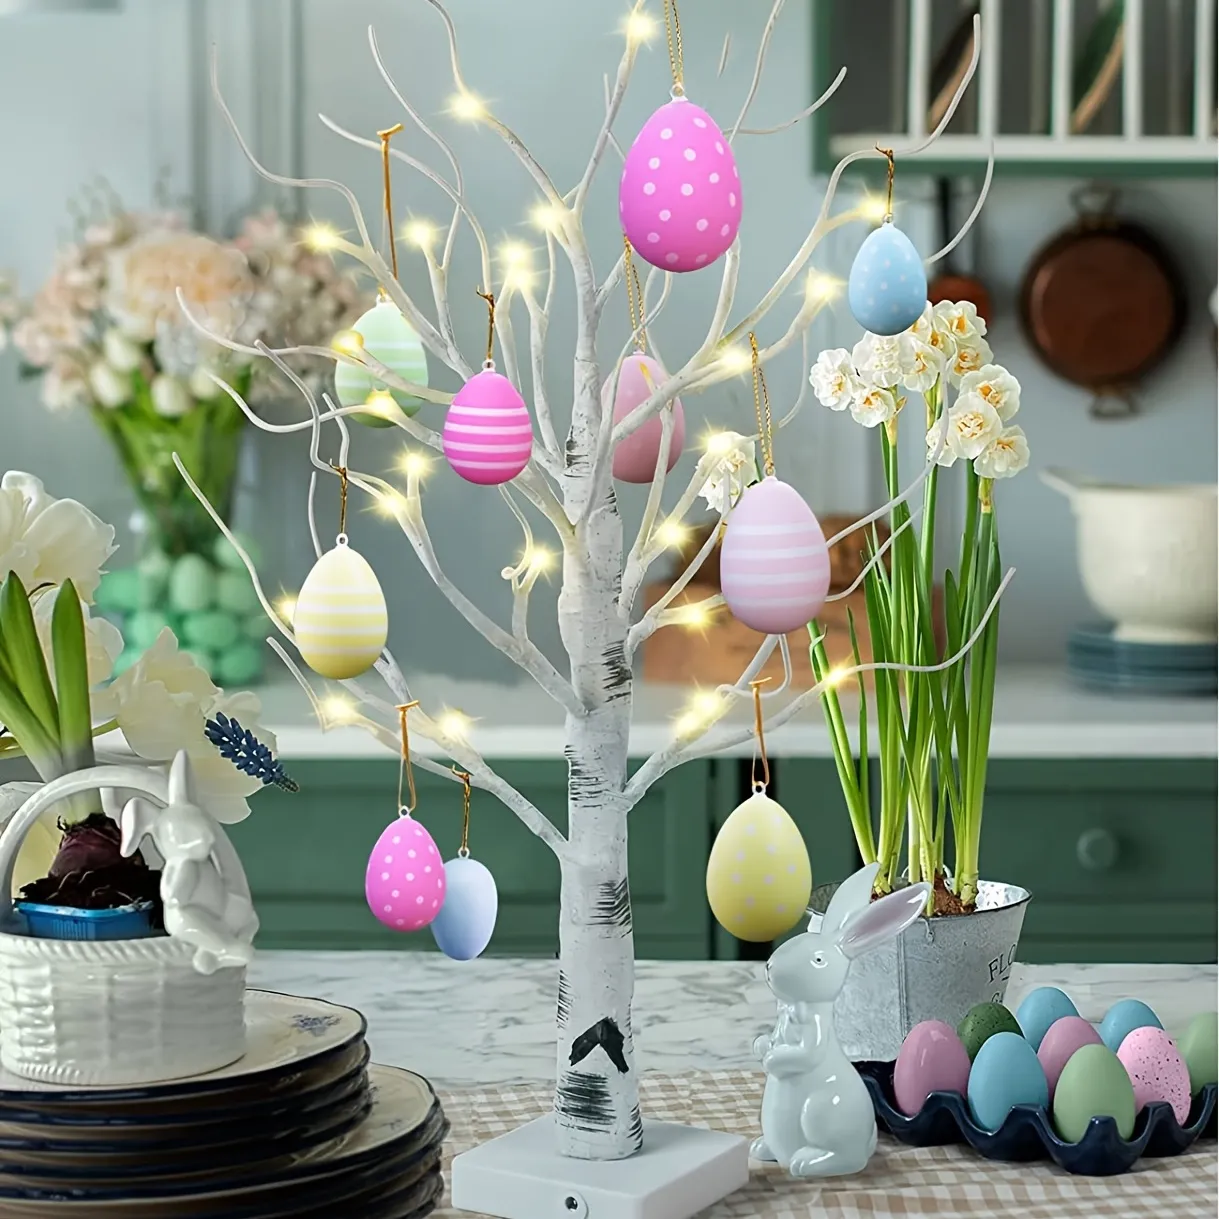 12pcs Easter Hanging Egg Decorations Egg Ornaments With Dots Stripes Colorful Plastic Eggs Easter Tree Ornaments